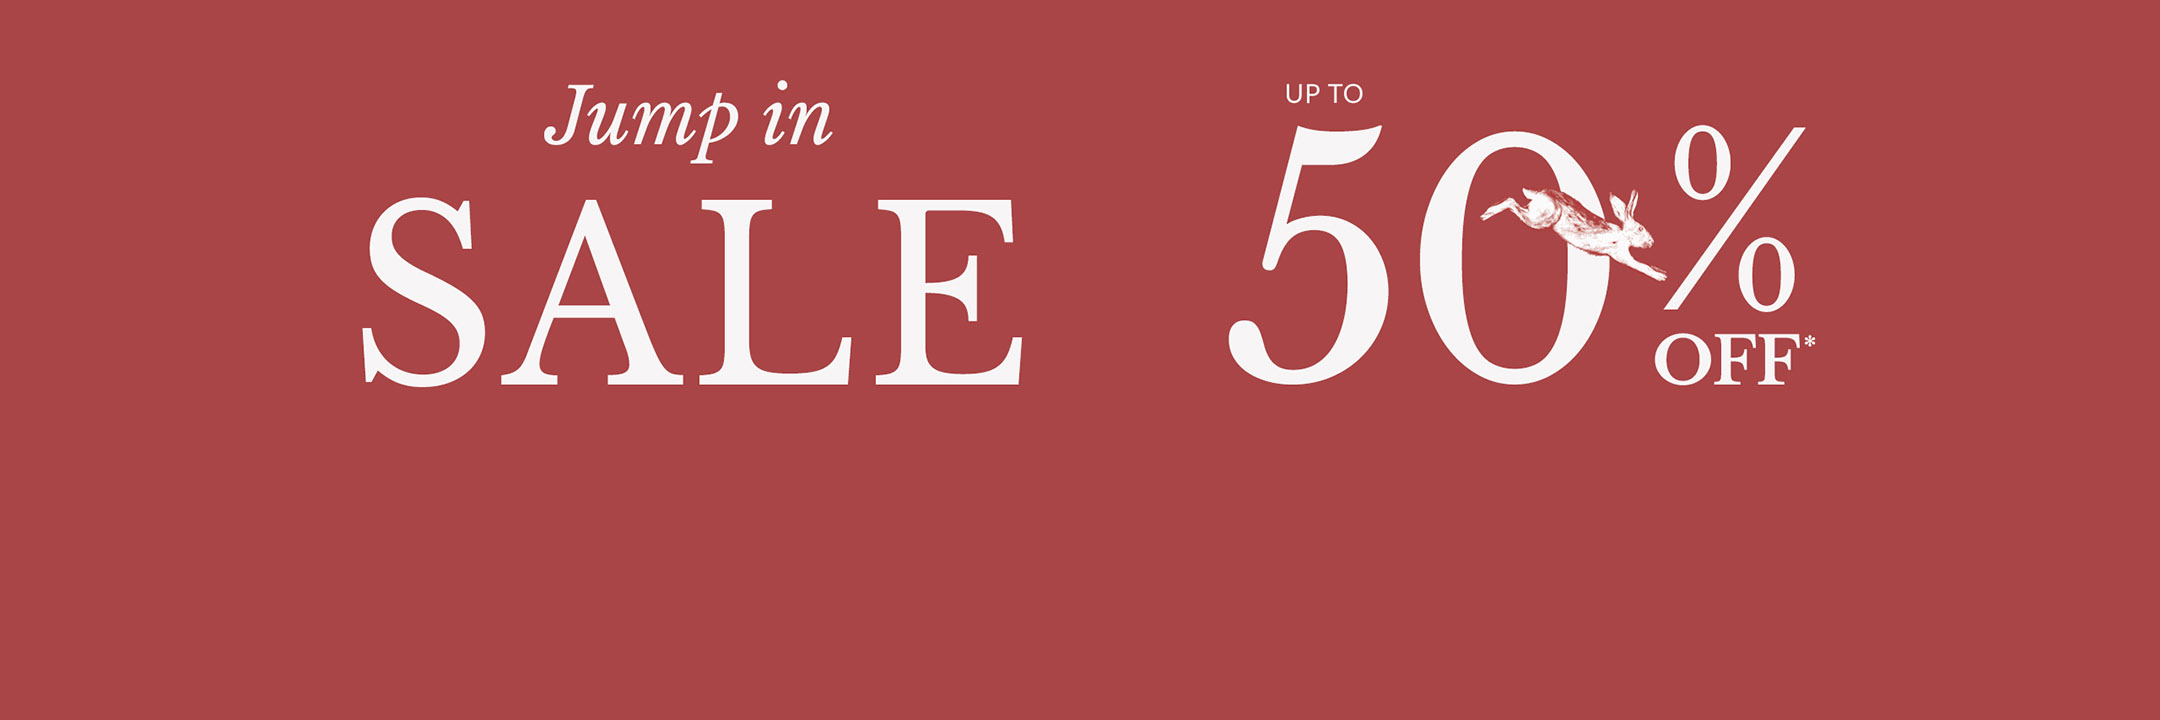 Jump in sale up to 50% off